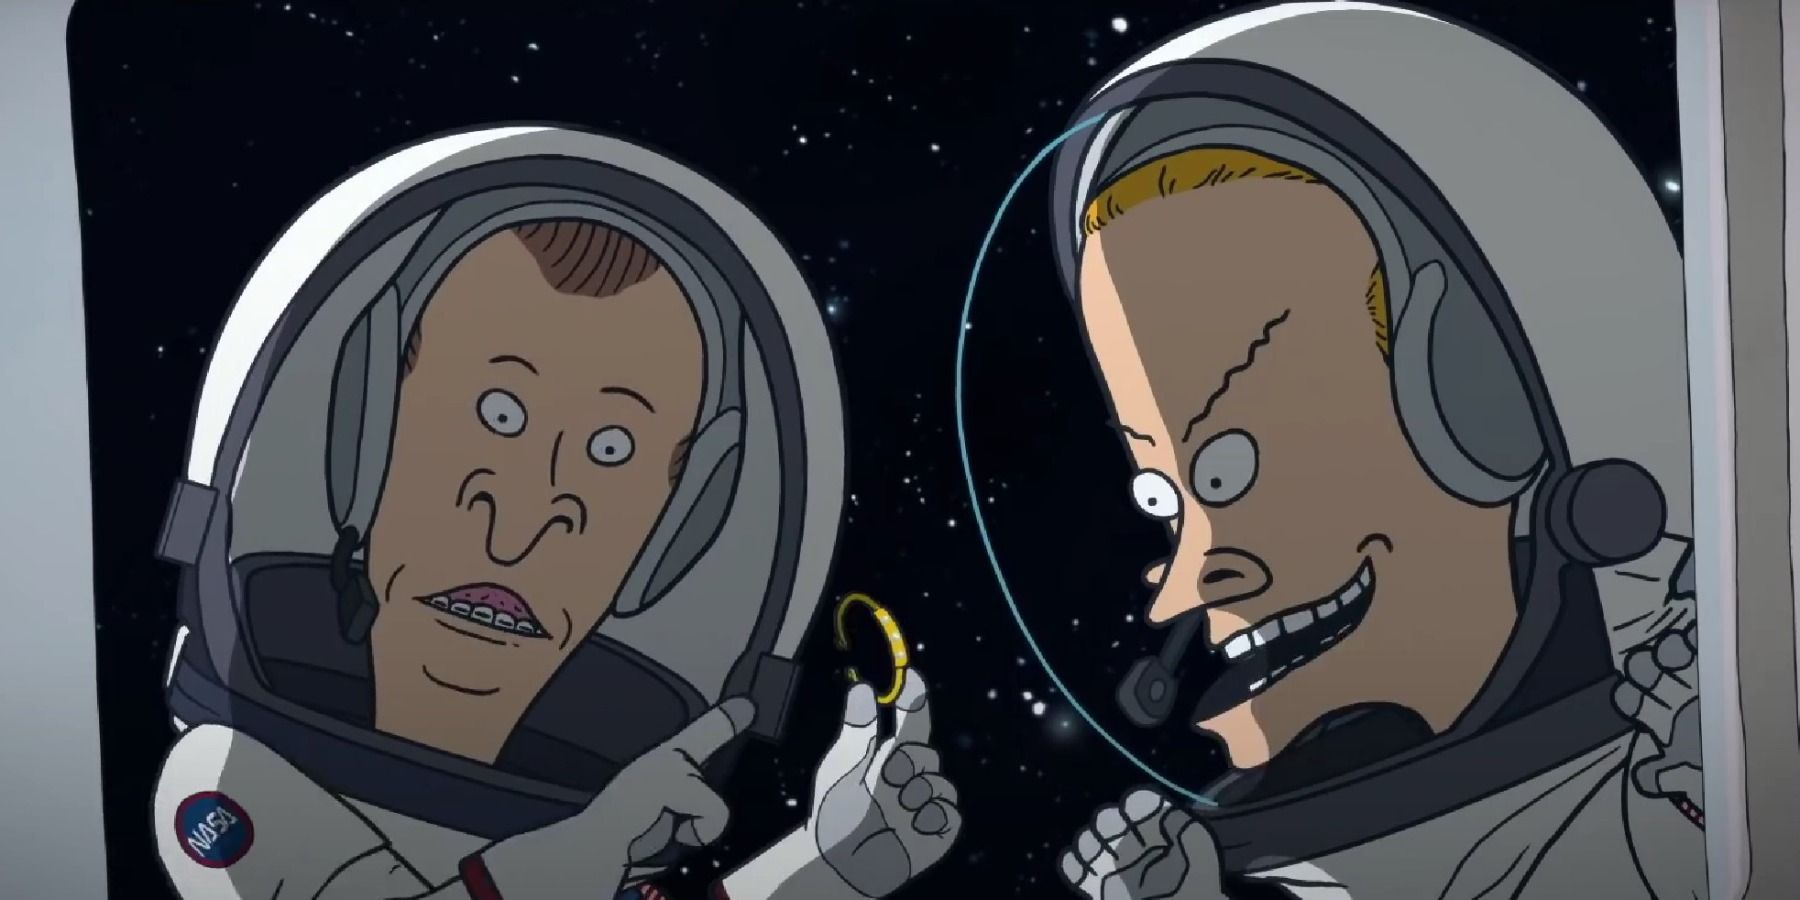 Beavis and Butt-Head Do the Universe in space